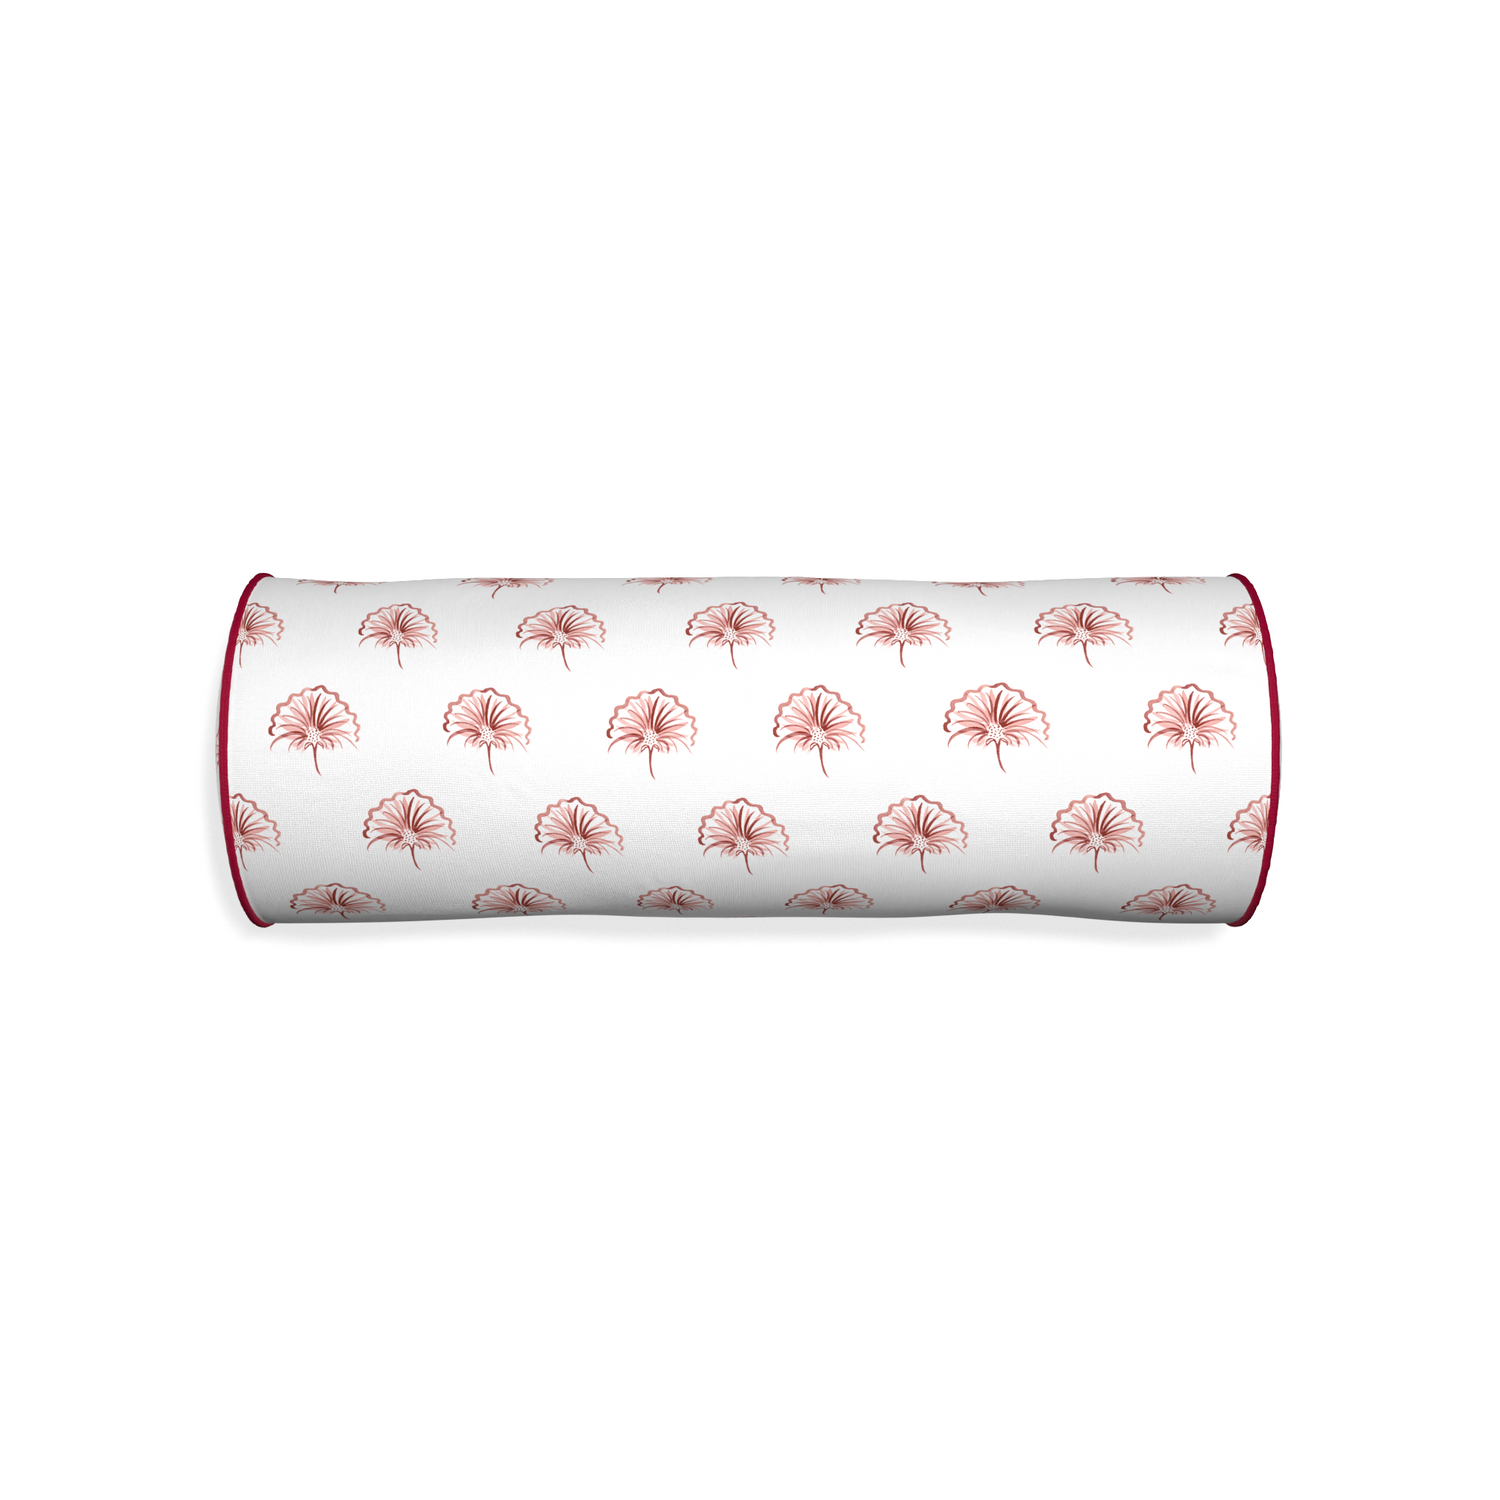 Bolster penelope rose custom floral pinkpillow with raspberry piping on white background